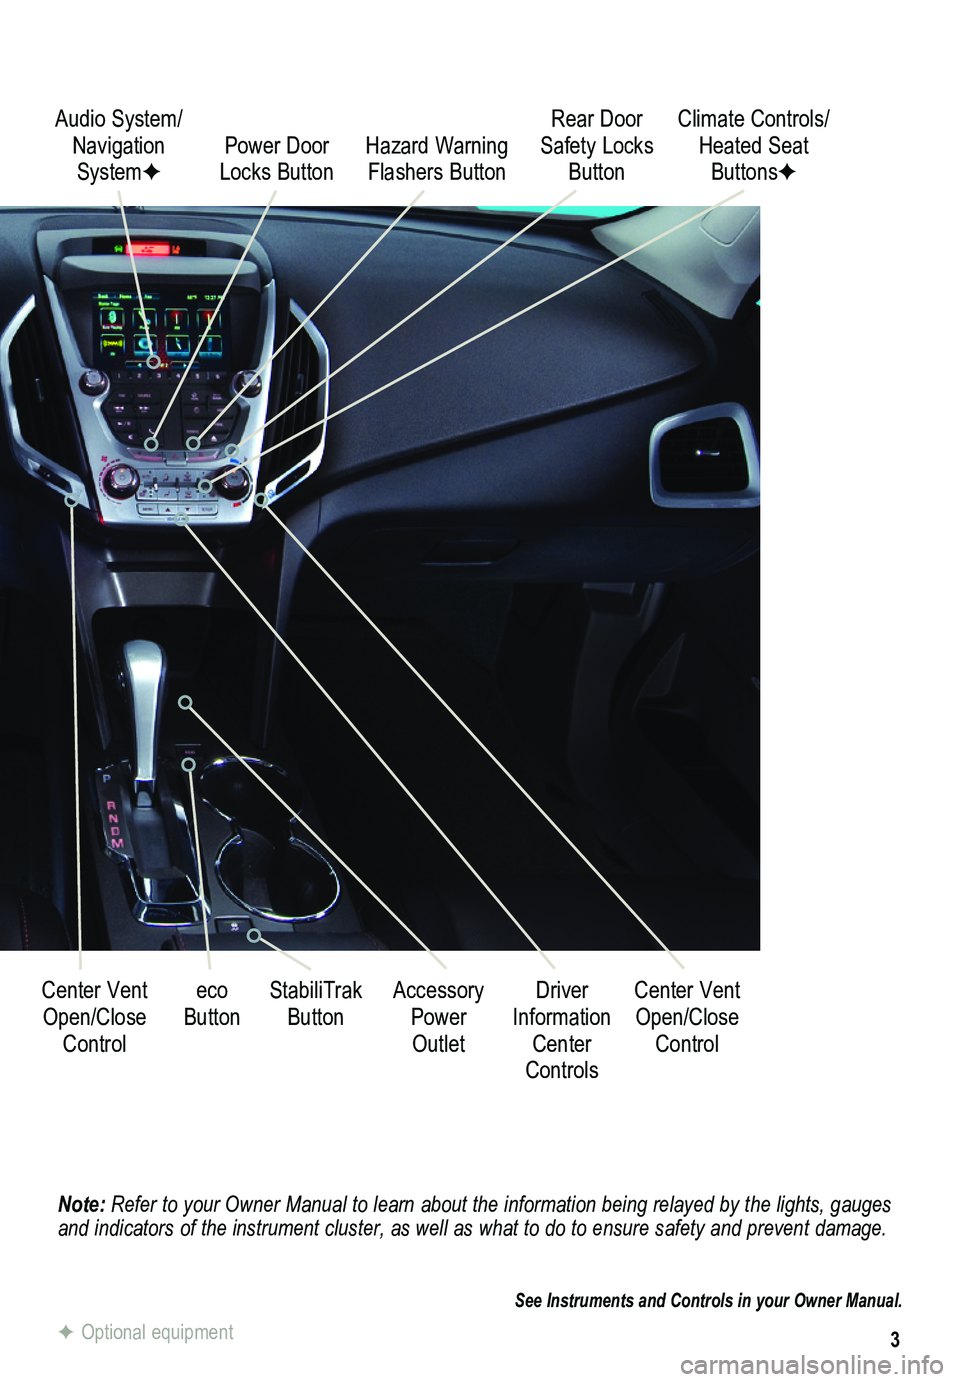 GMC TERRAIN 2013  Get To Know Guide 3
Note: Refer to your Owner Manual to learn about the information being relayed \
by the lights, gauges and indicators of the instrument cluster, as well as what to do to ensure safety an\
d prevent d